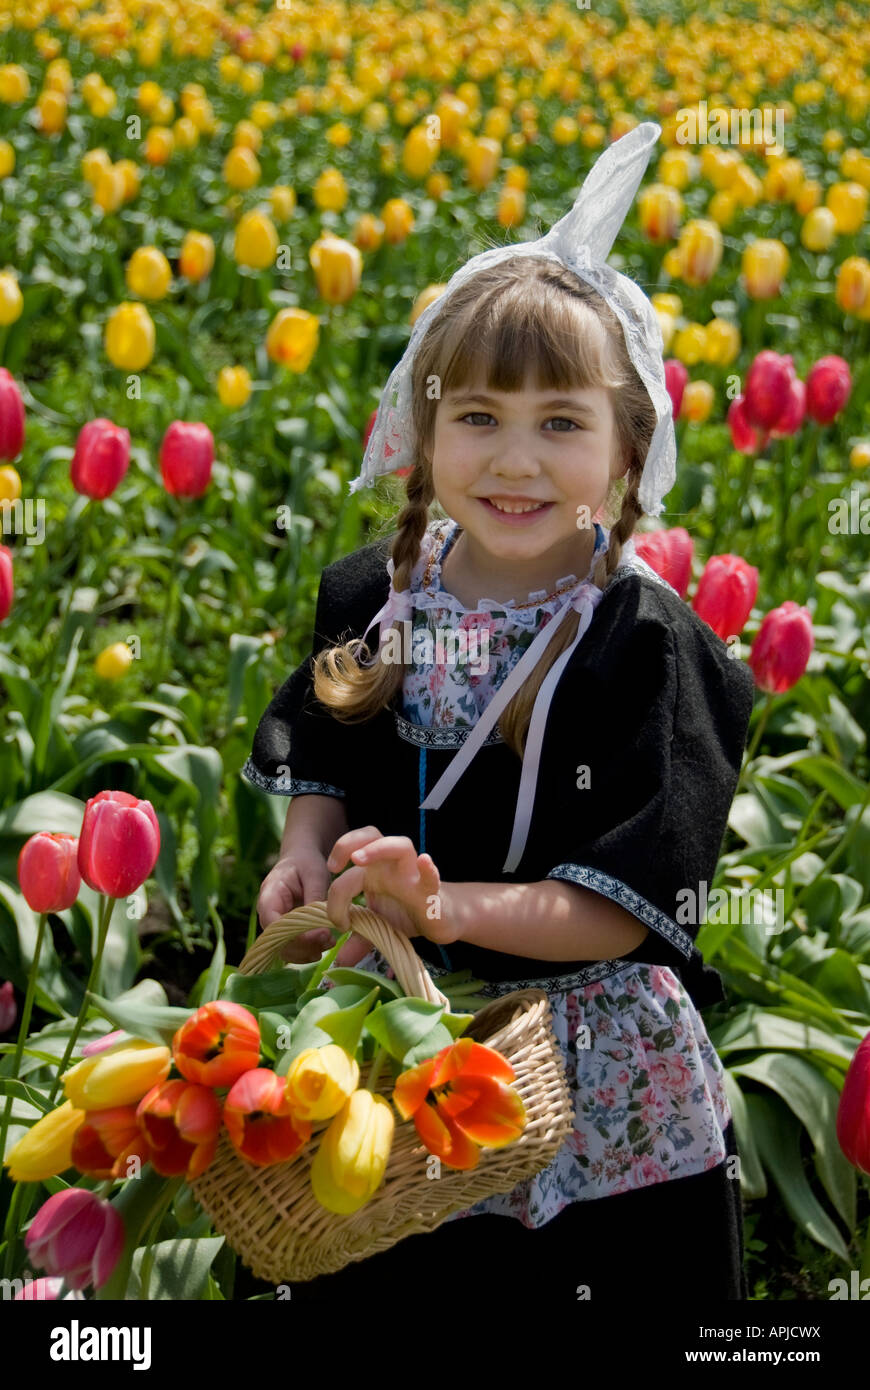 Young Girl holding a Tulip Basket in a Tulip Field Stock Photo